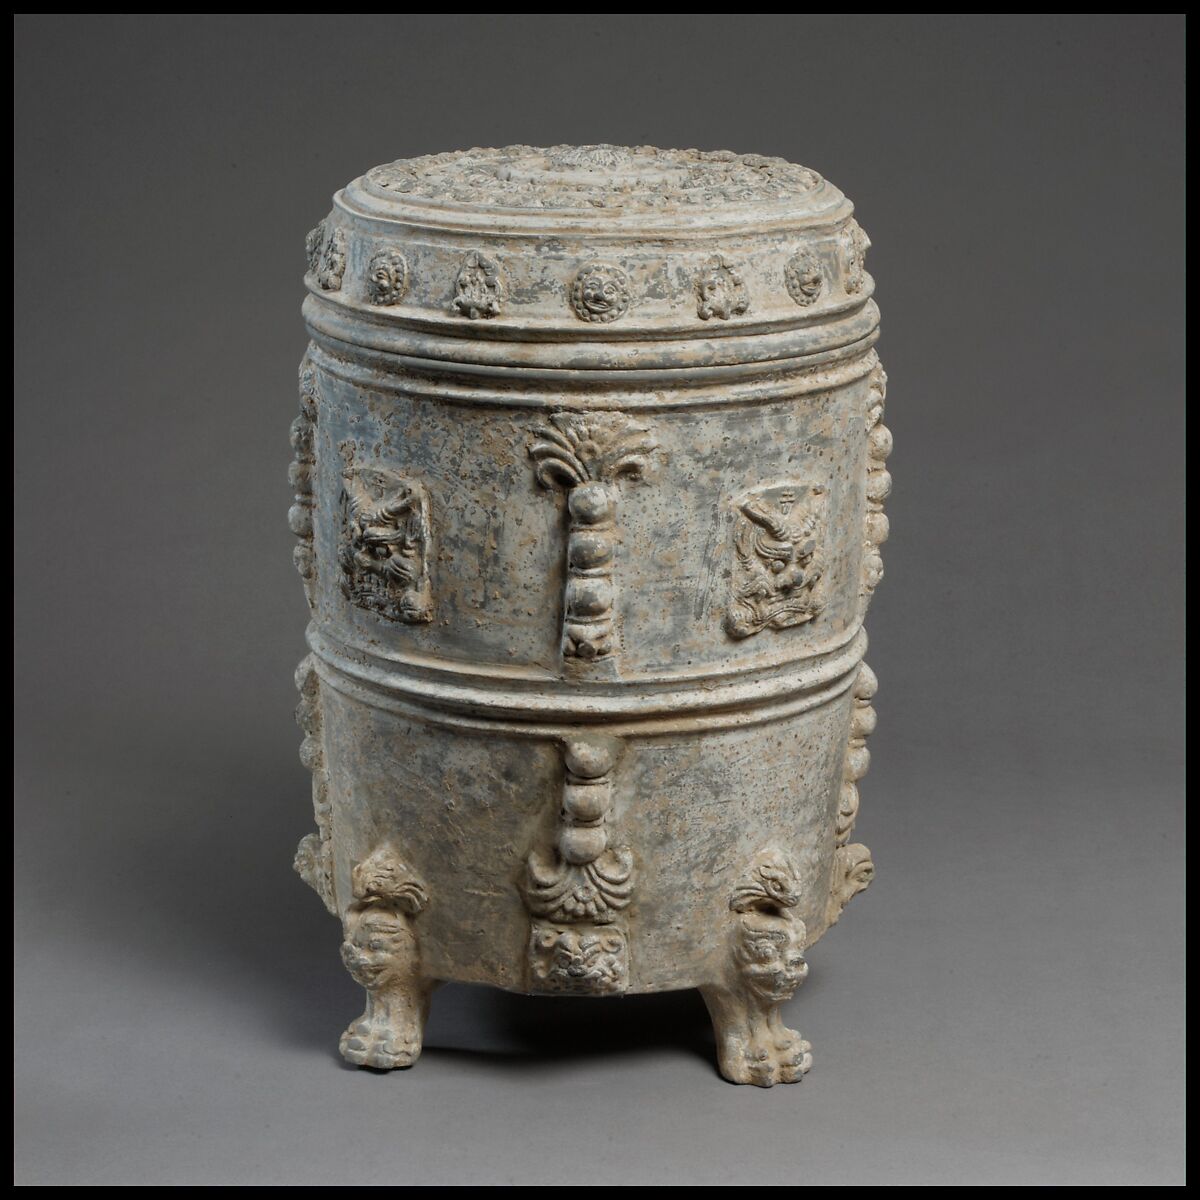 Covered footed vessel, Earthenware with applied-relief decoration under white slip, China 